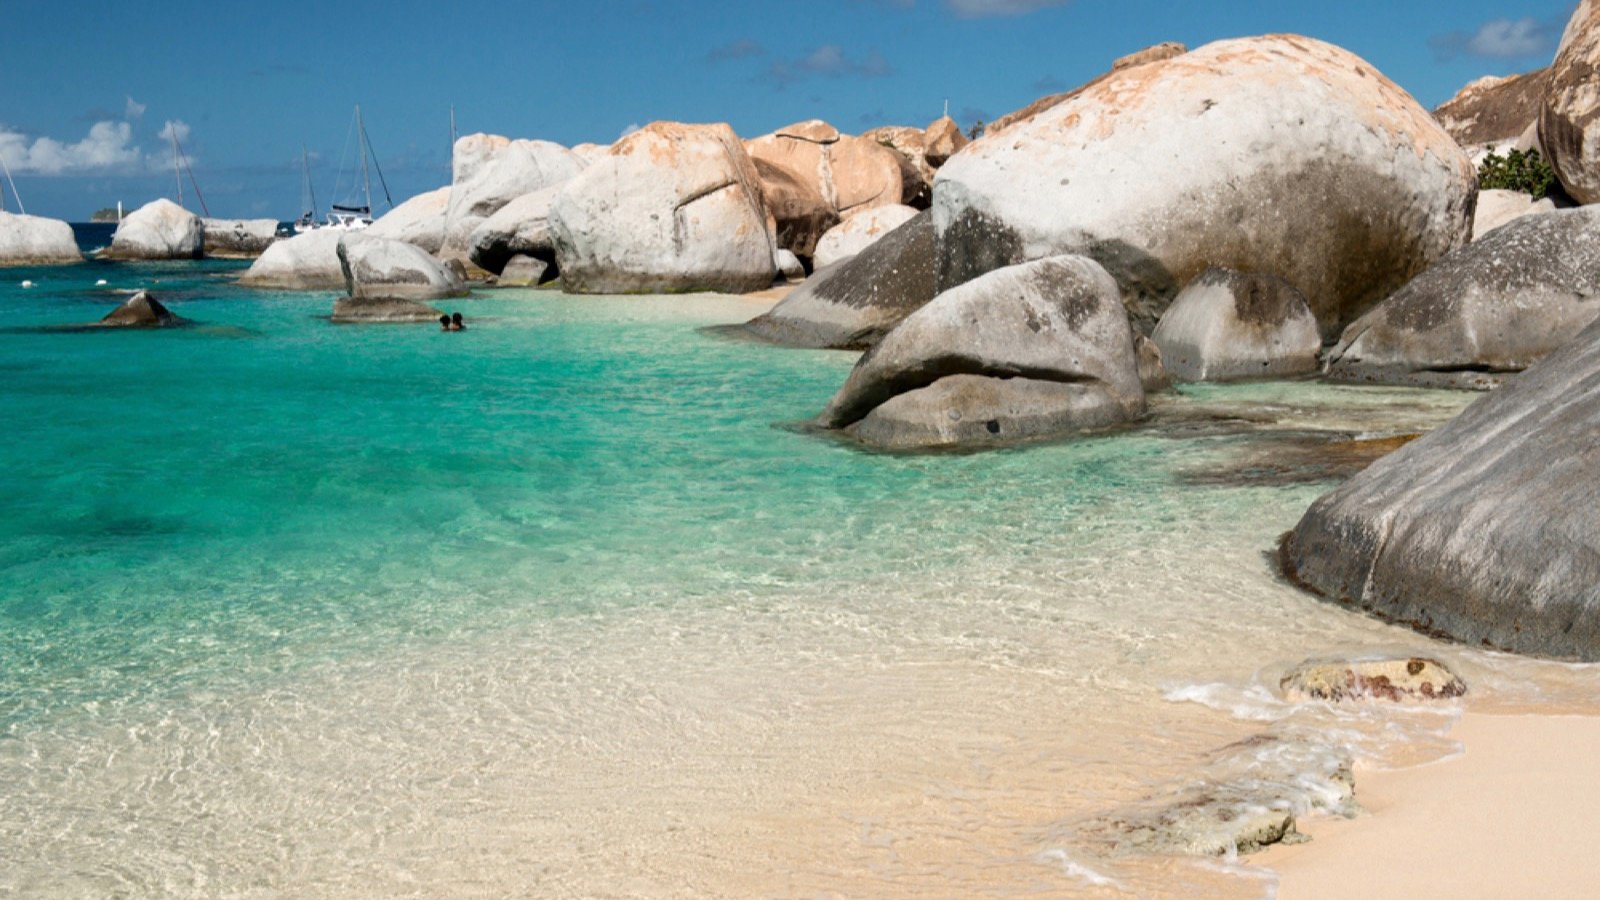 <p>These natural pools are separated by giant boulders, making them a perfect home for fish and snorkelers. It is an astounding place for adventures to climb over the rocks and explore hidden crevices. You never know what you might find in one of those hidden pools.</p><p>Source: <a href="https://www.celebritycruises.com/blog/best-snorkeling-in-the-caribbean">Celebrity Cruises. </a></p>